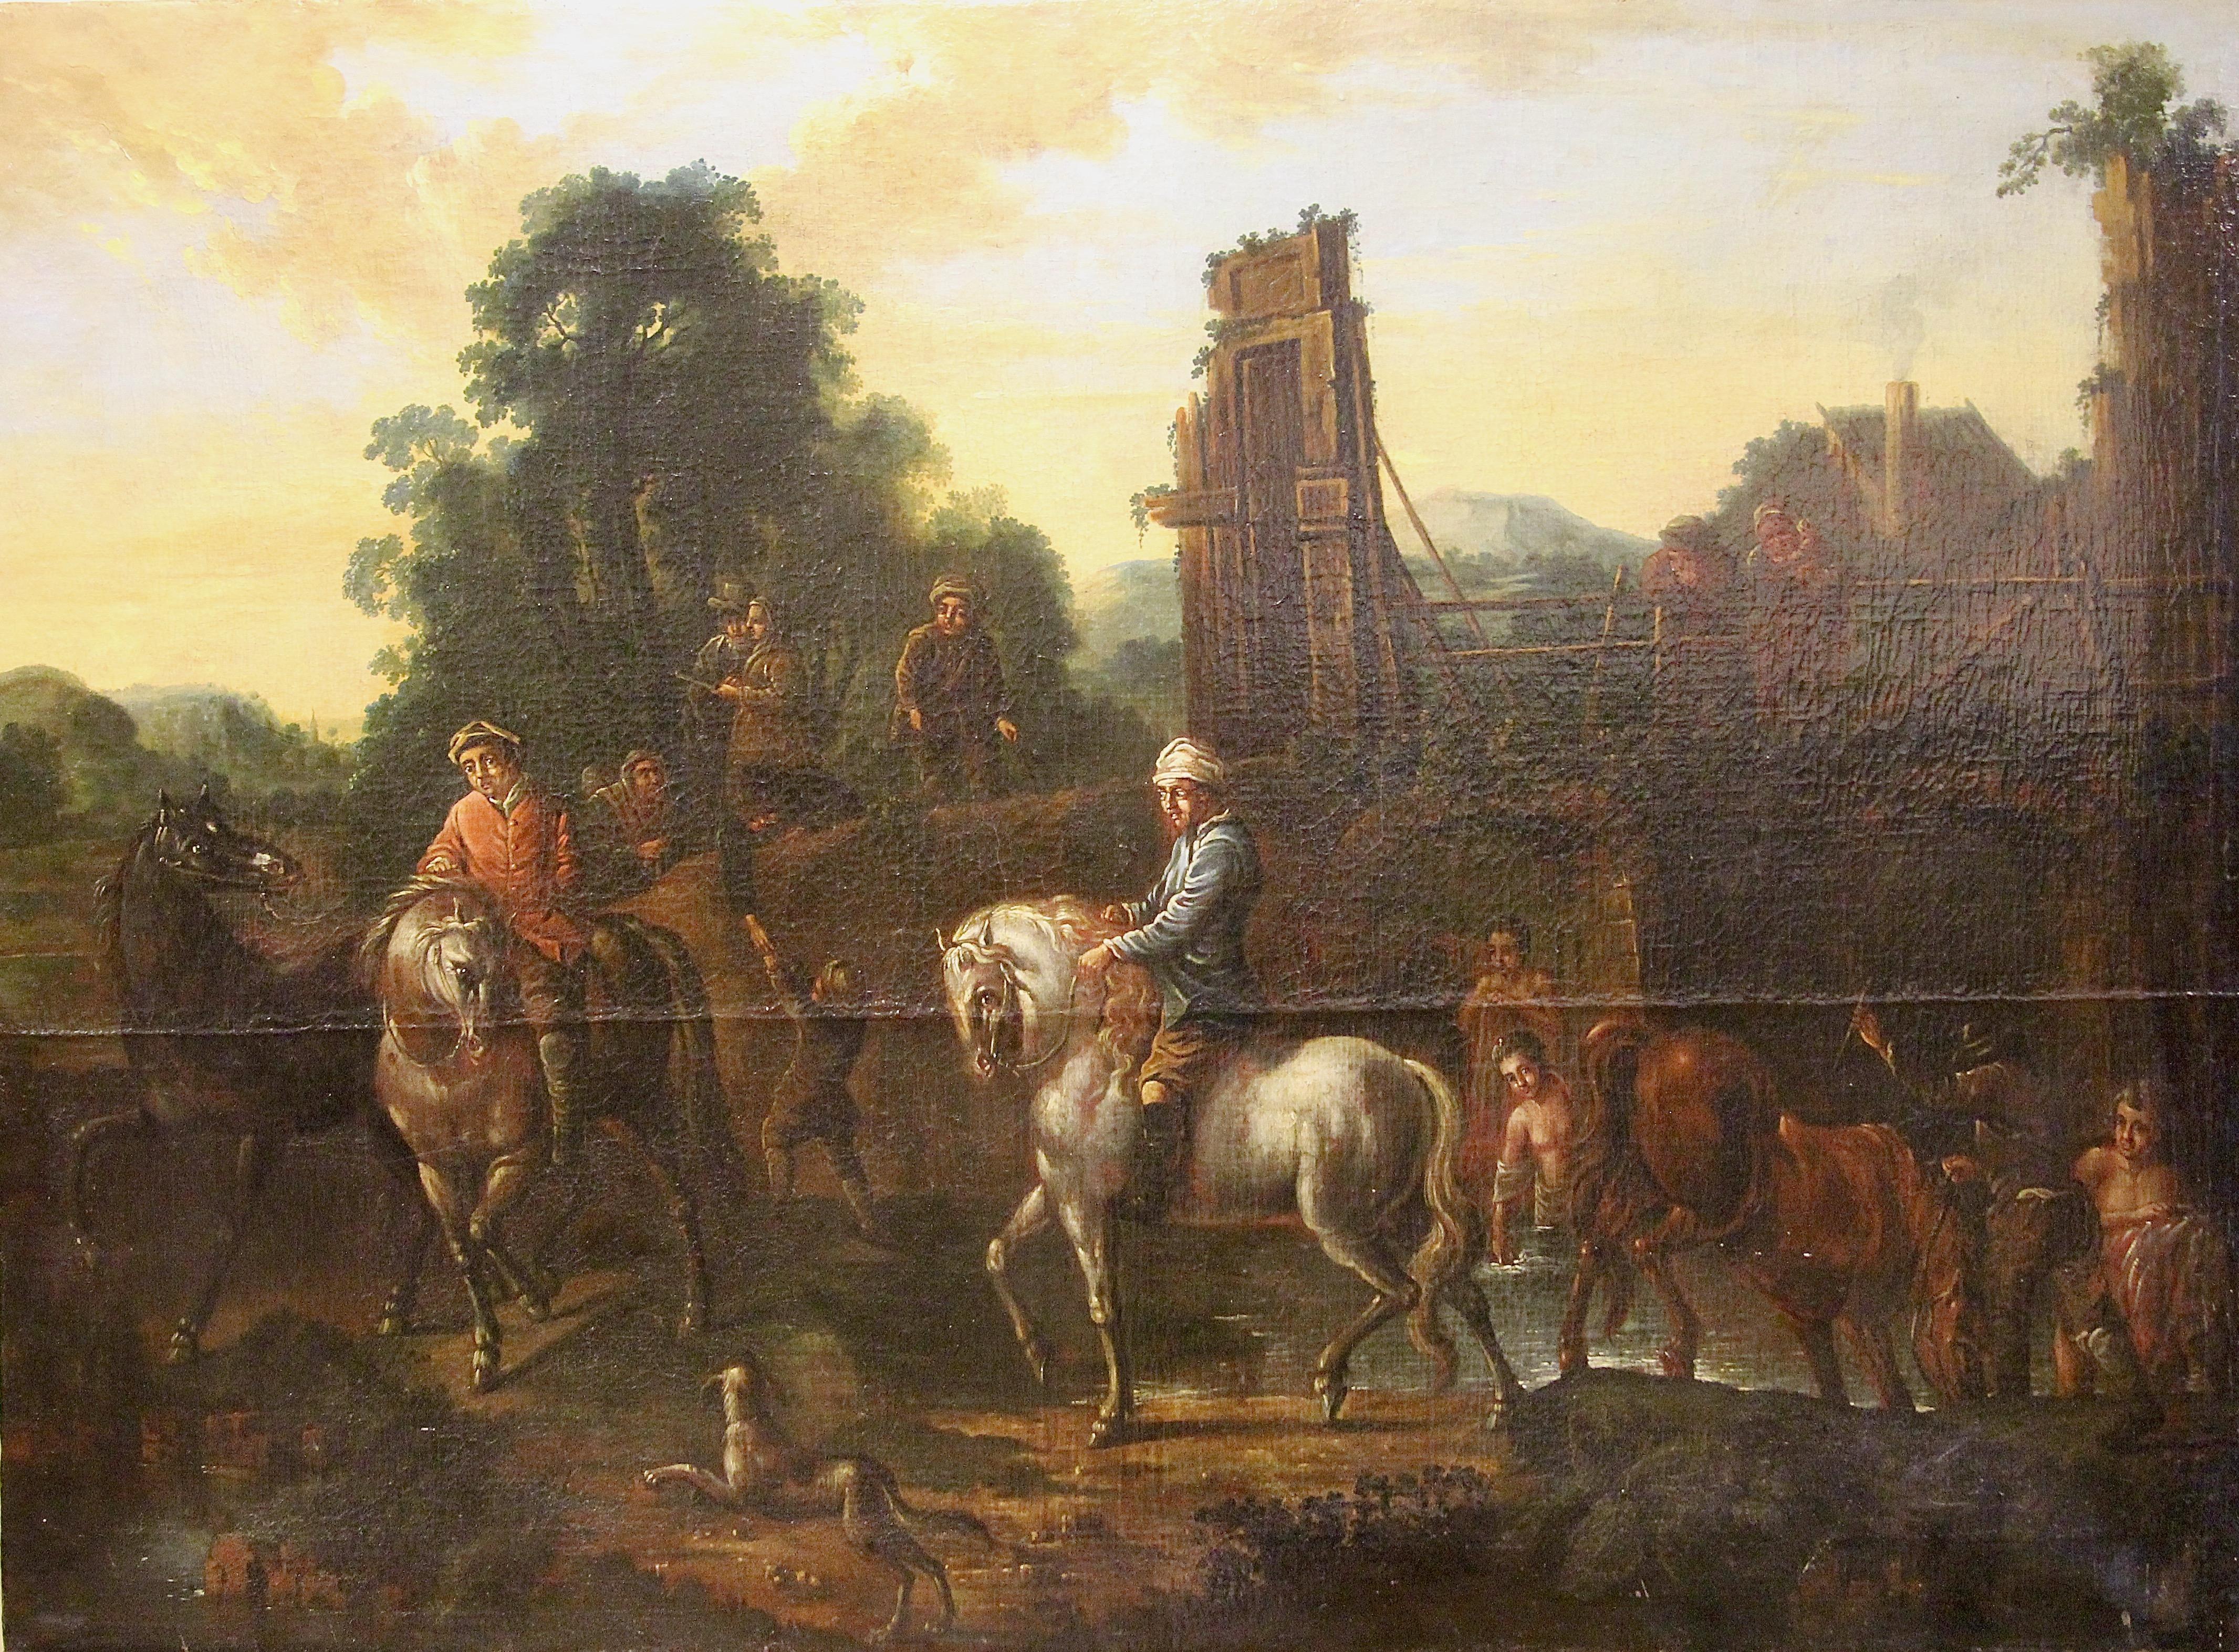 Unknown Figurative Painting - 17th Century, Old Master Painting, Oil on Canvas, "The Rest with the Horses". 